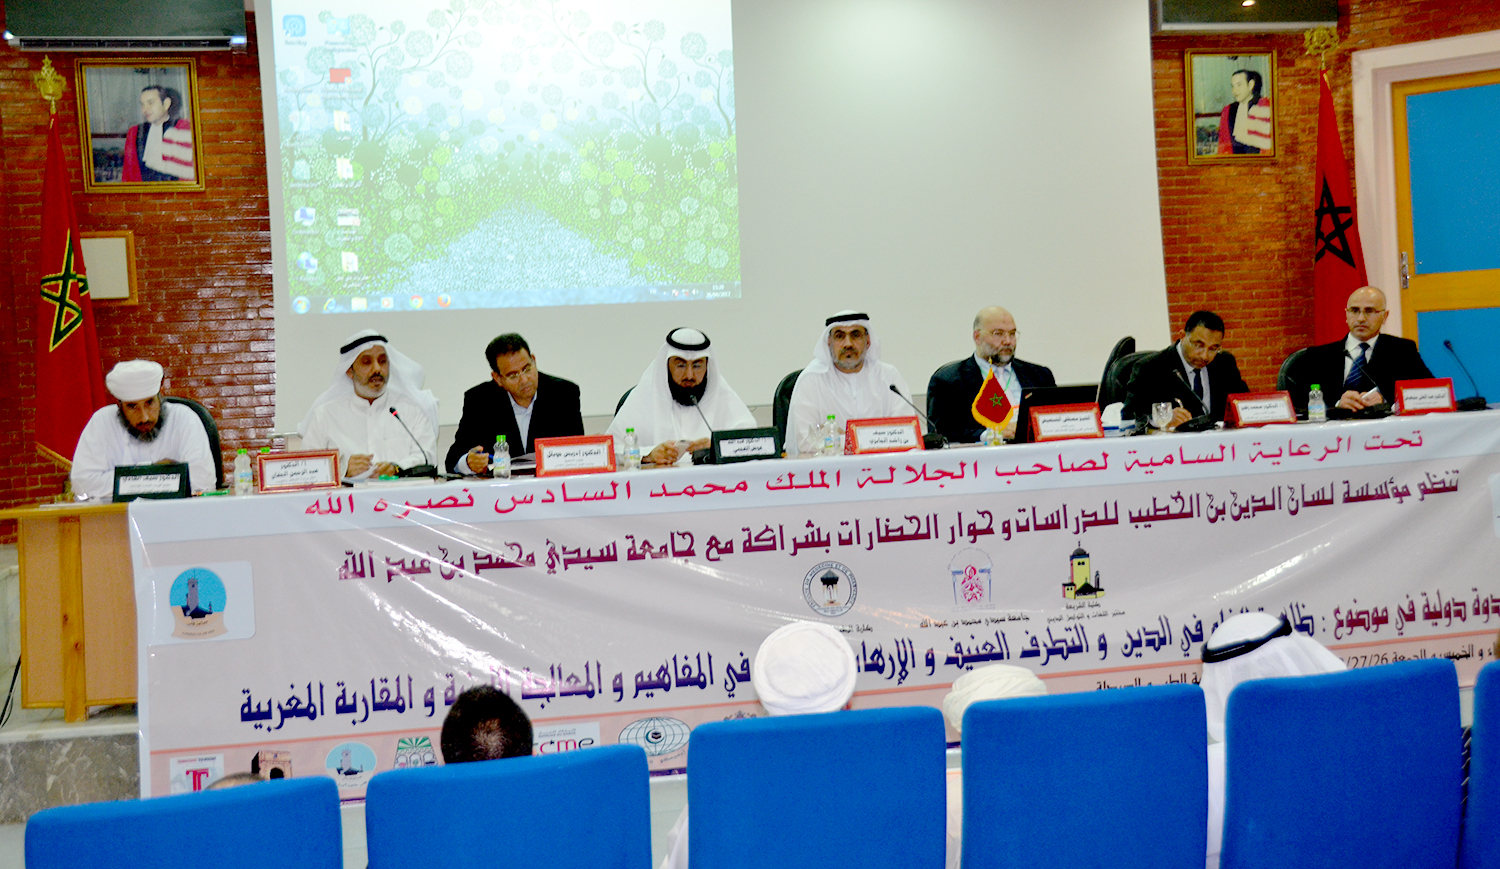 Part of the participants in symposium organized by Islamic Educational, Scientific, and Cultural Organization (IESCO)